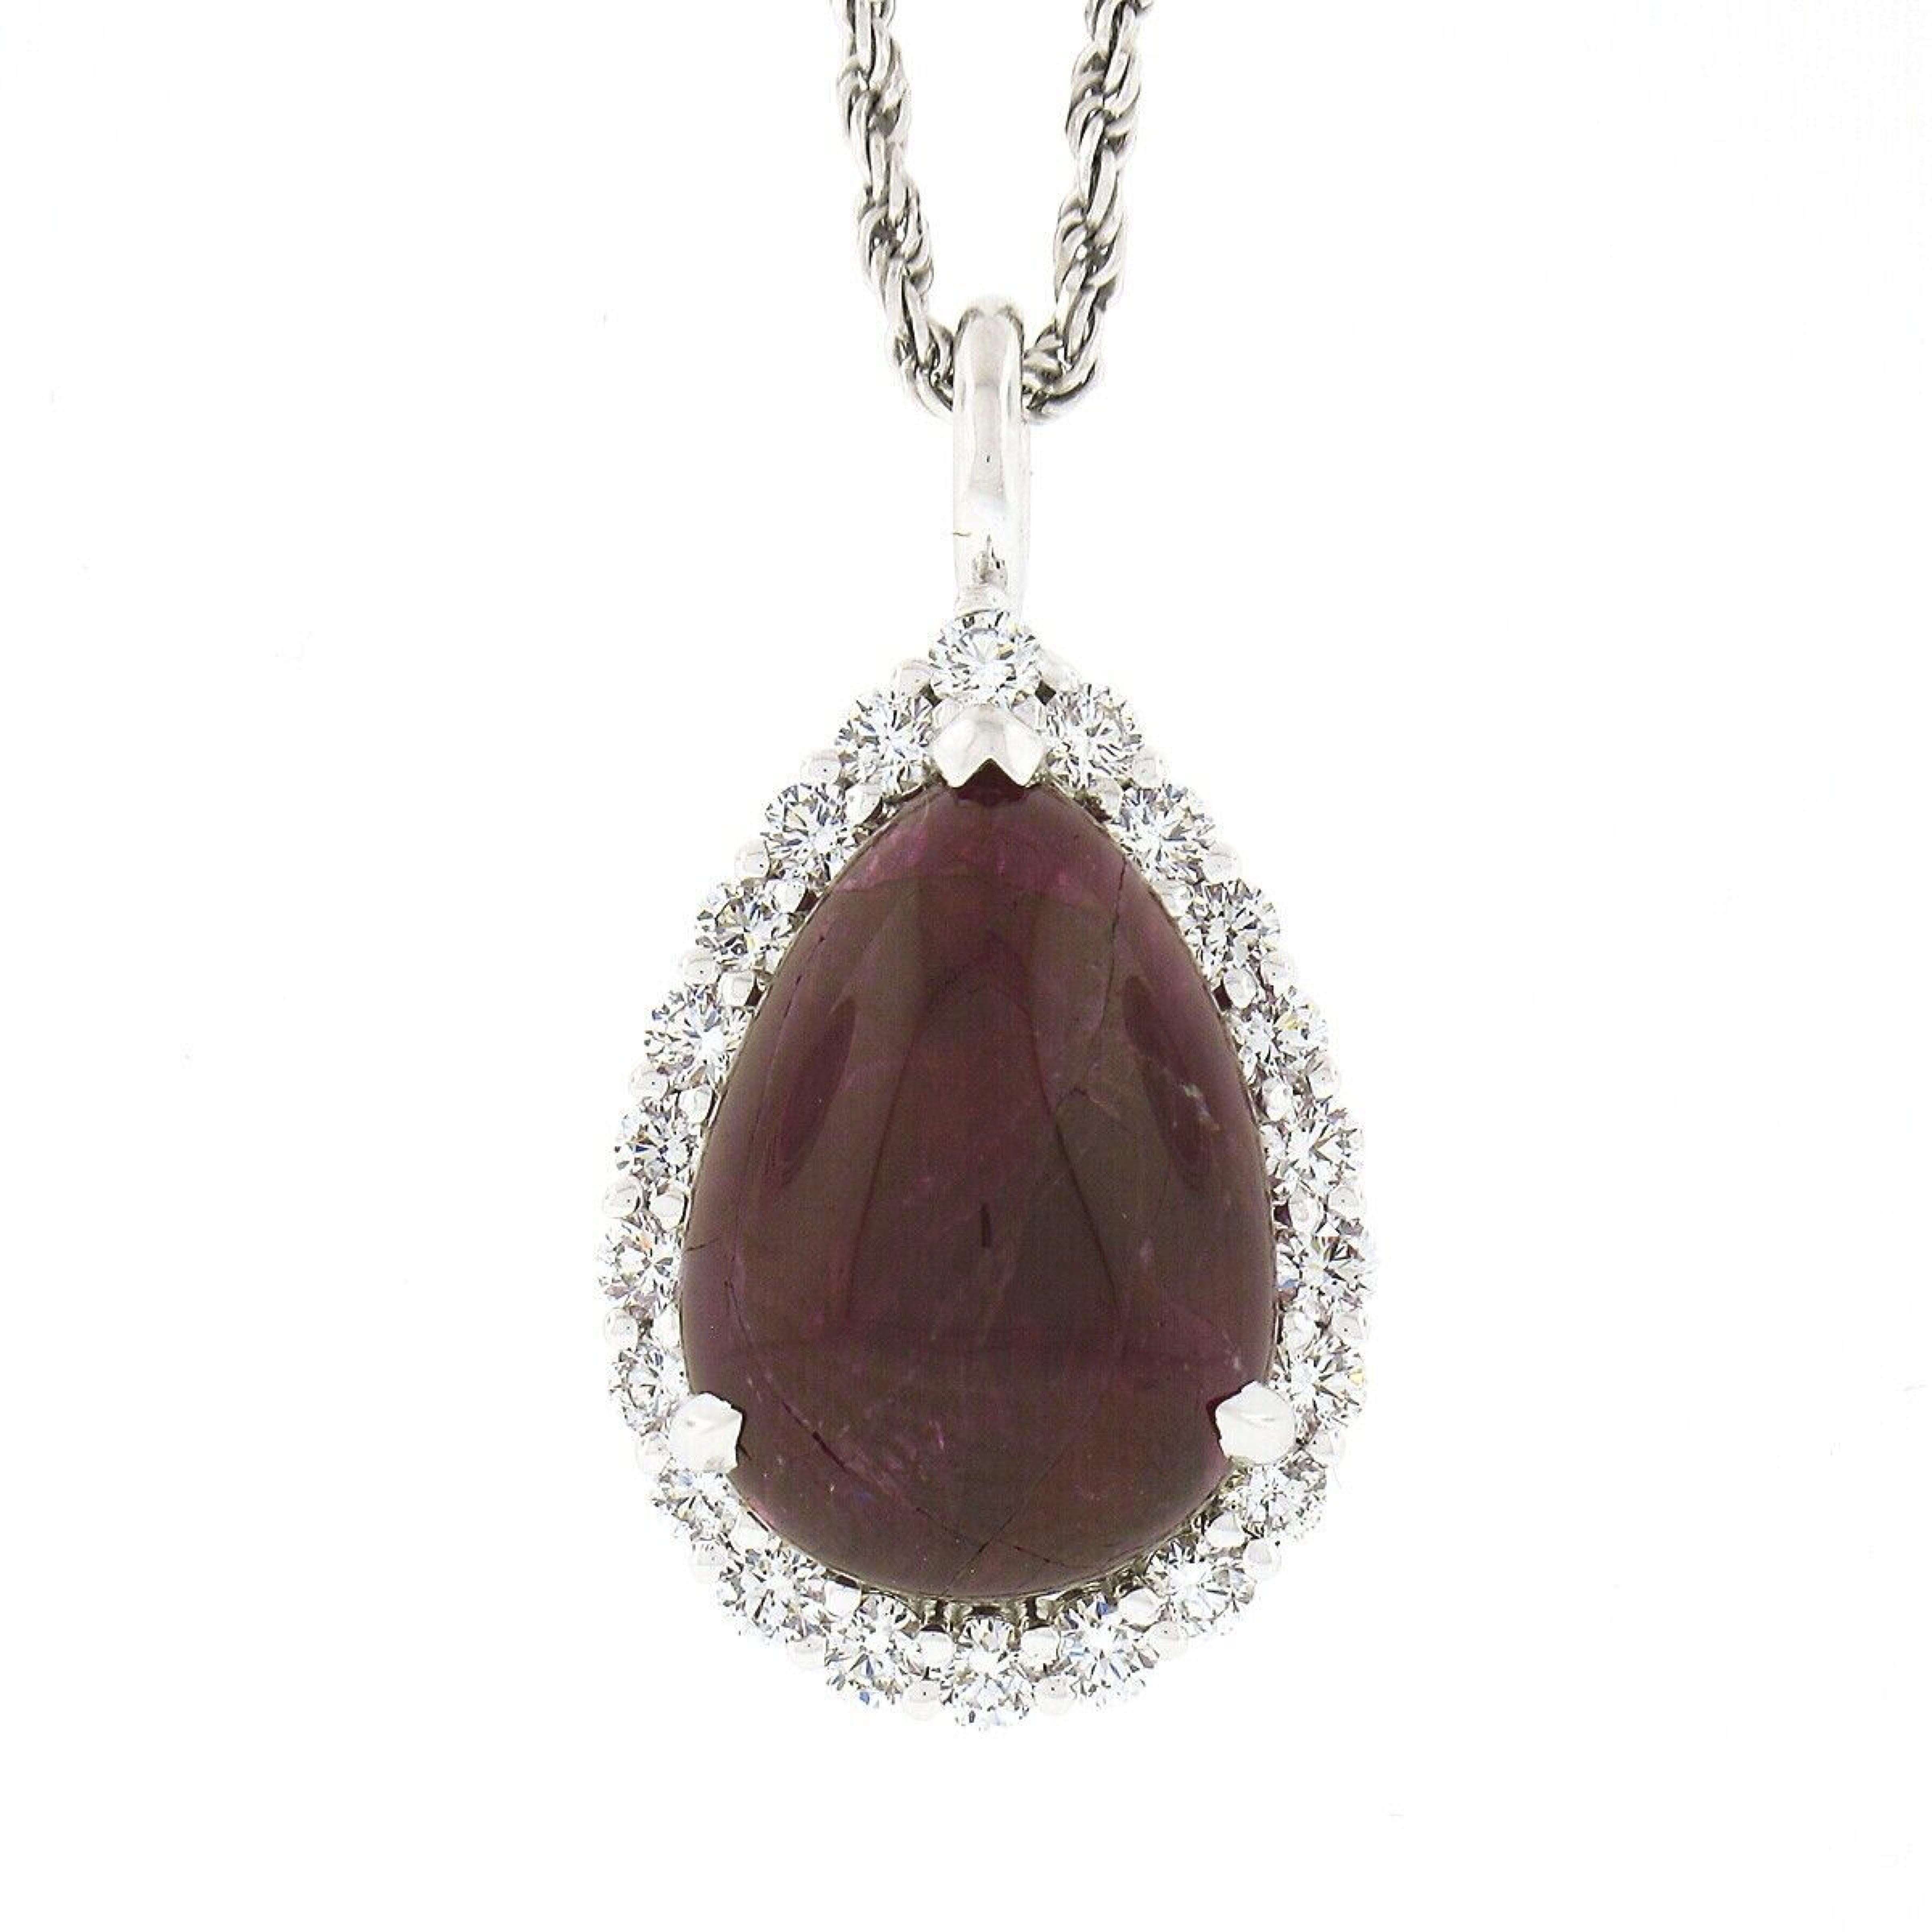 Here we have a gorgeous, custom made, ruby and diamond teardrop pendant necklace that is newly crafted in solid 14k white gold. The fine quality ruby solitaire is GIA certified with a pear cabochon cut, displaying the most attractive and truly rich